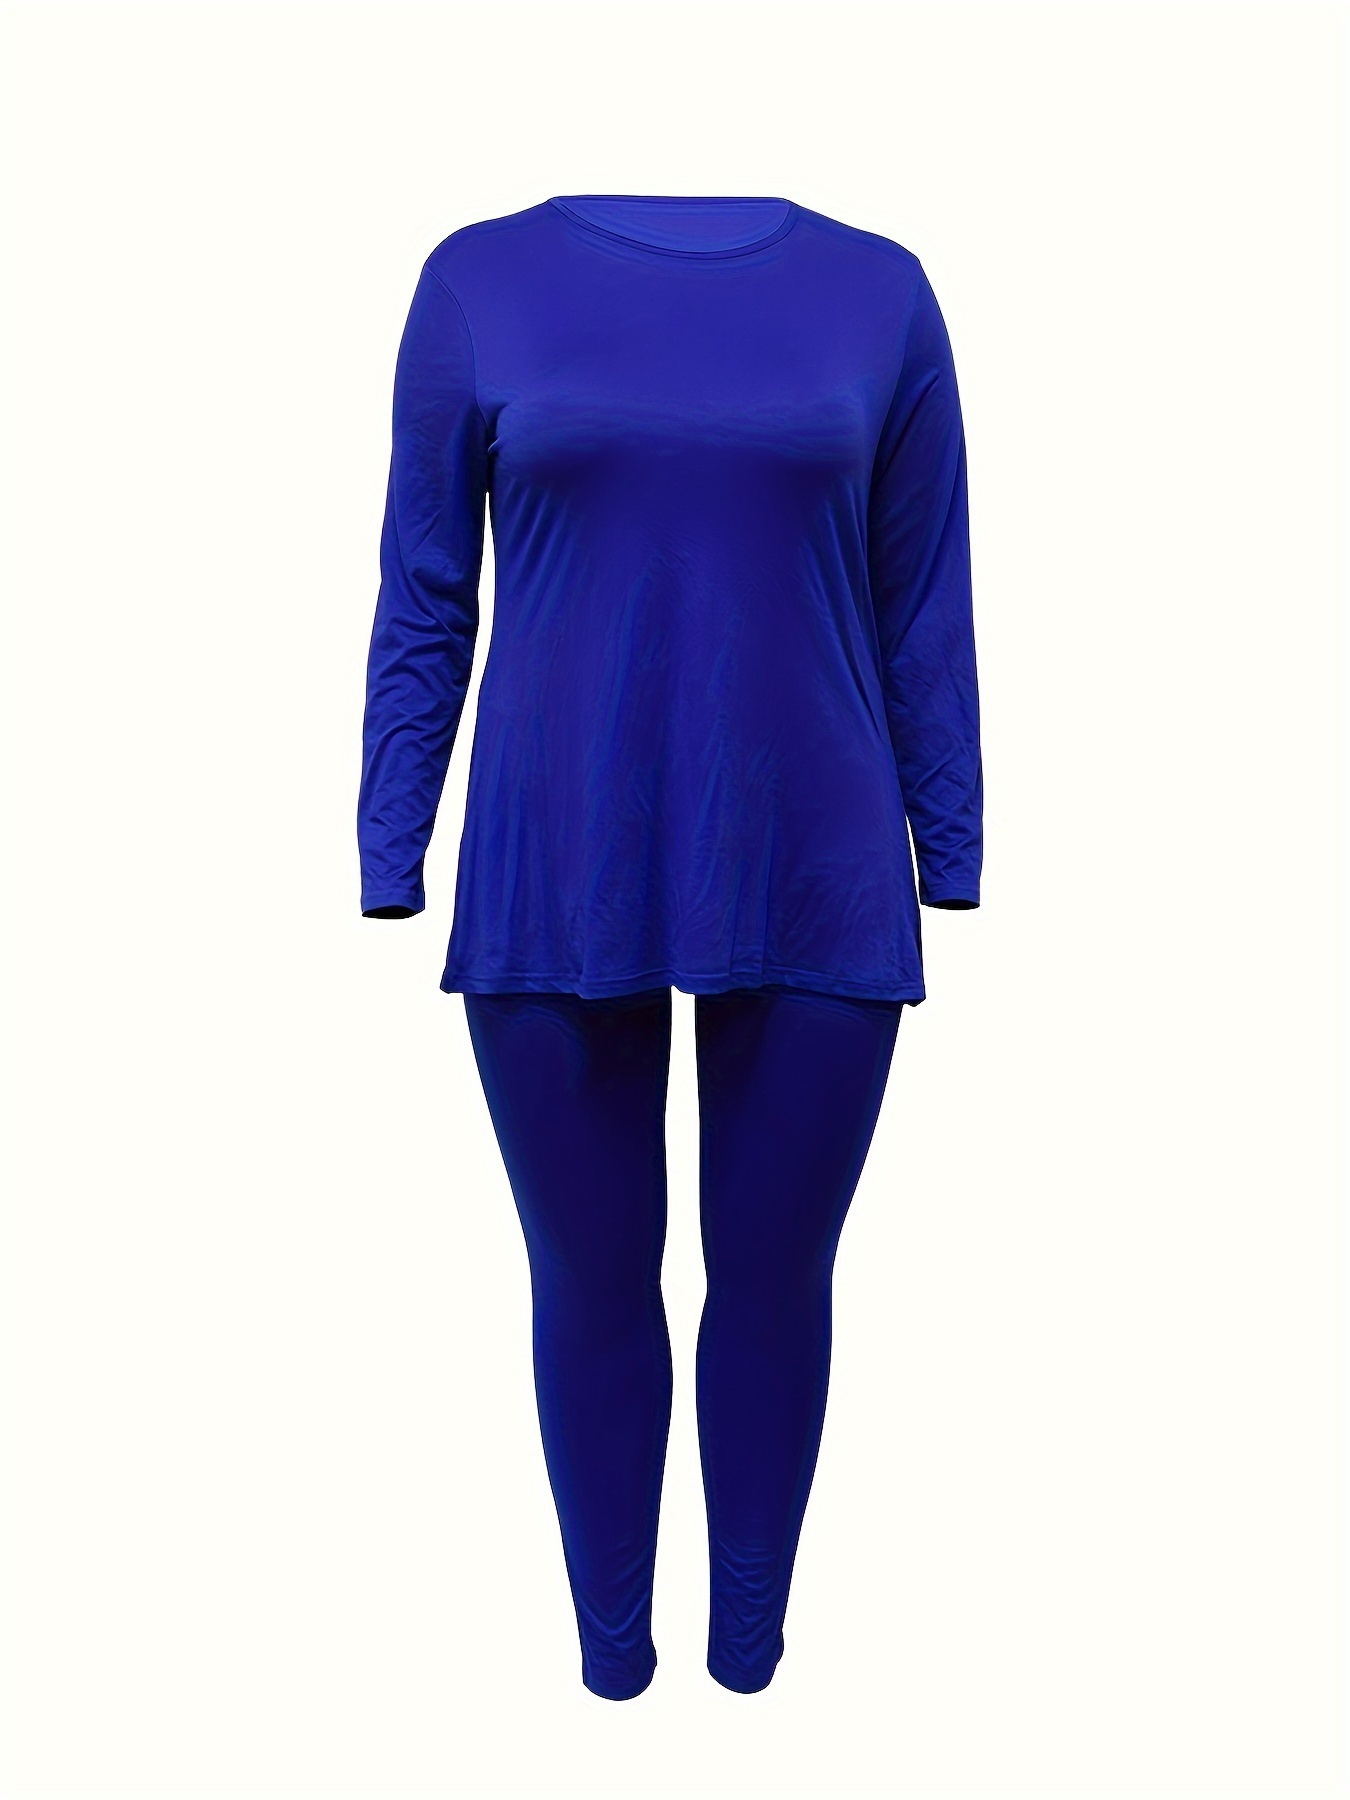 Plus Size Women Thermal Underwear Top Middle High Neck Long Sleeve Casul  Top 